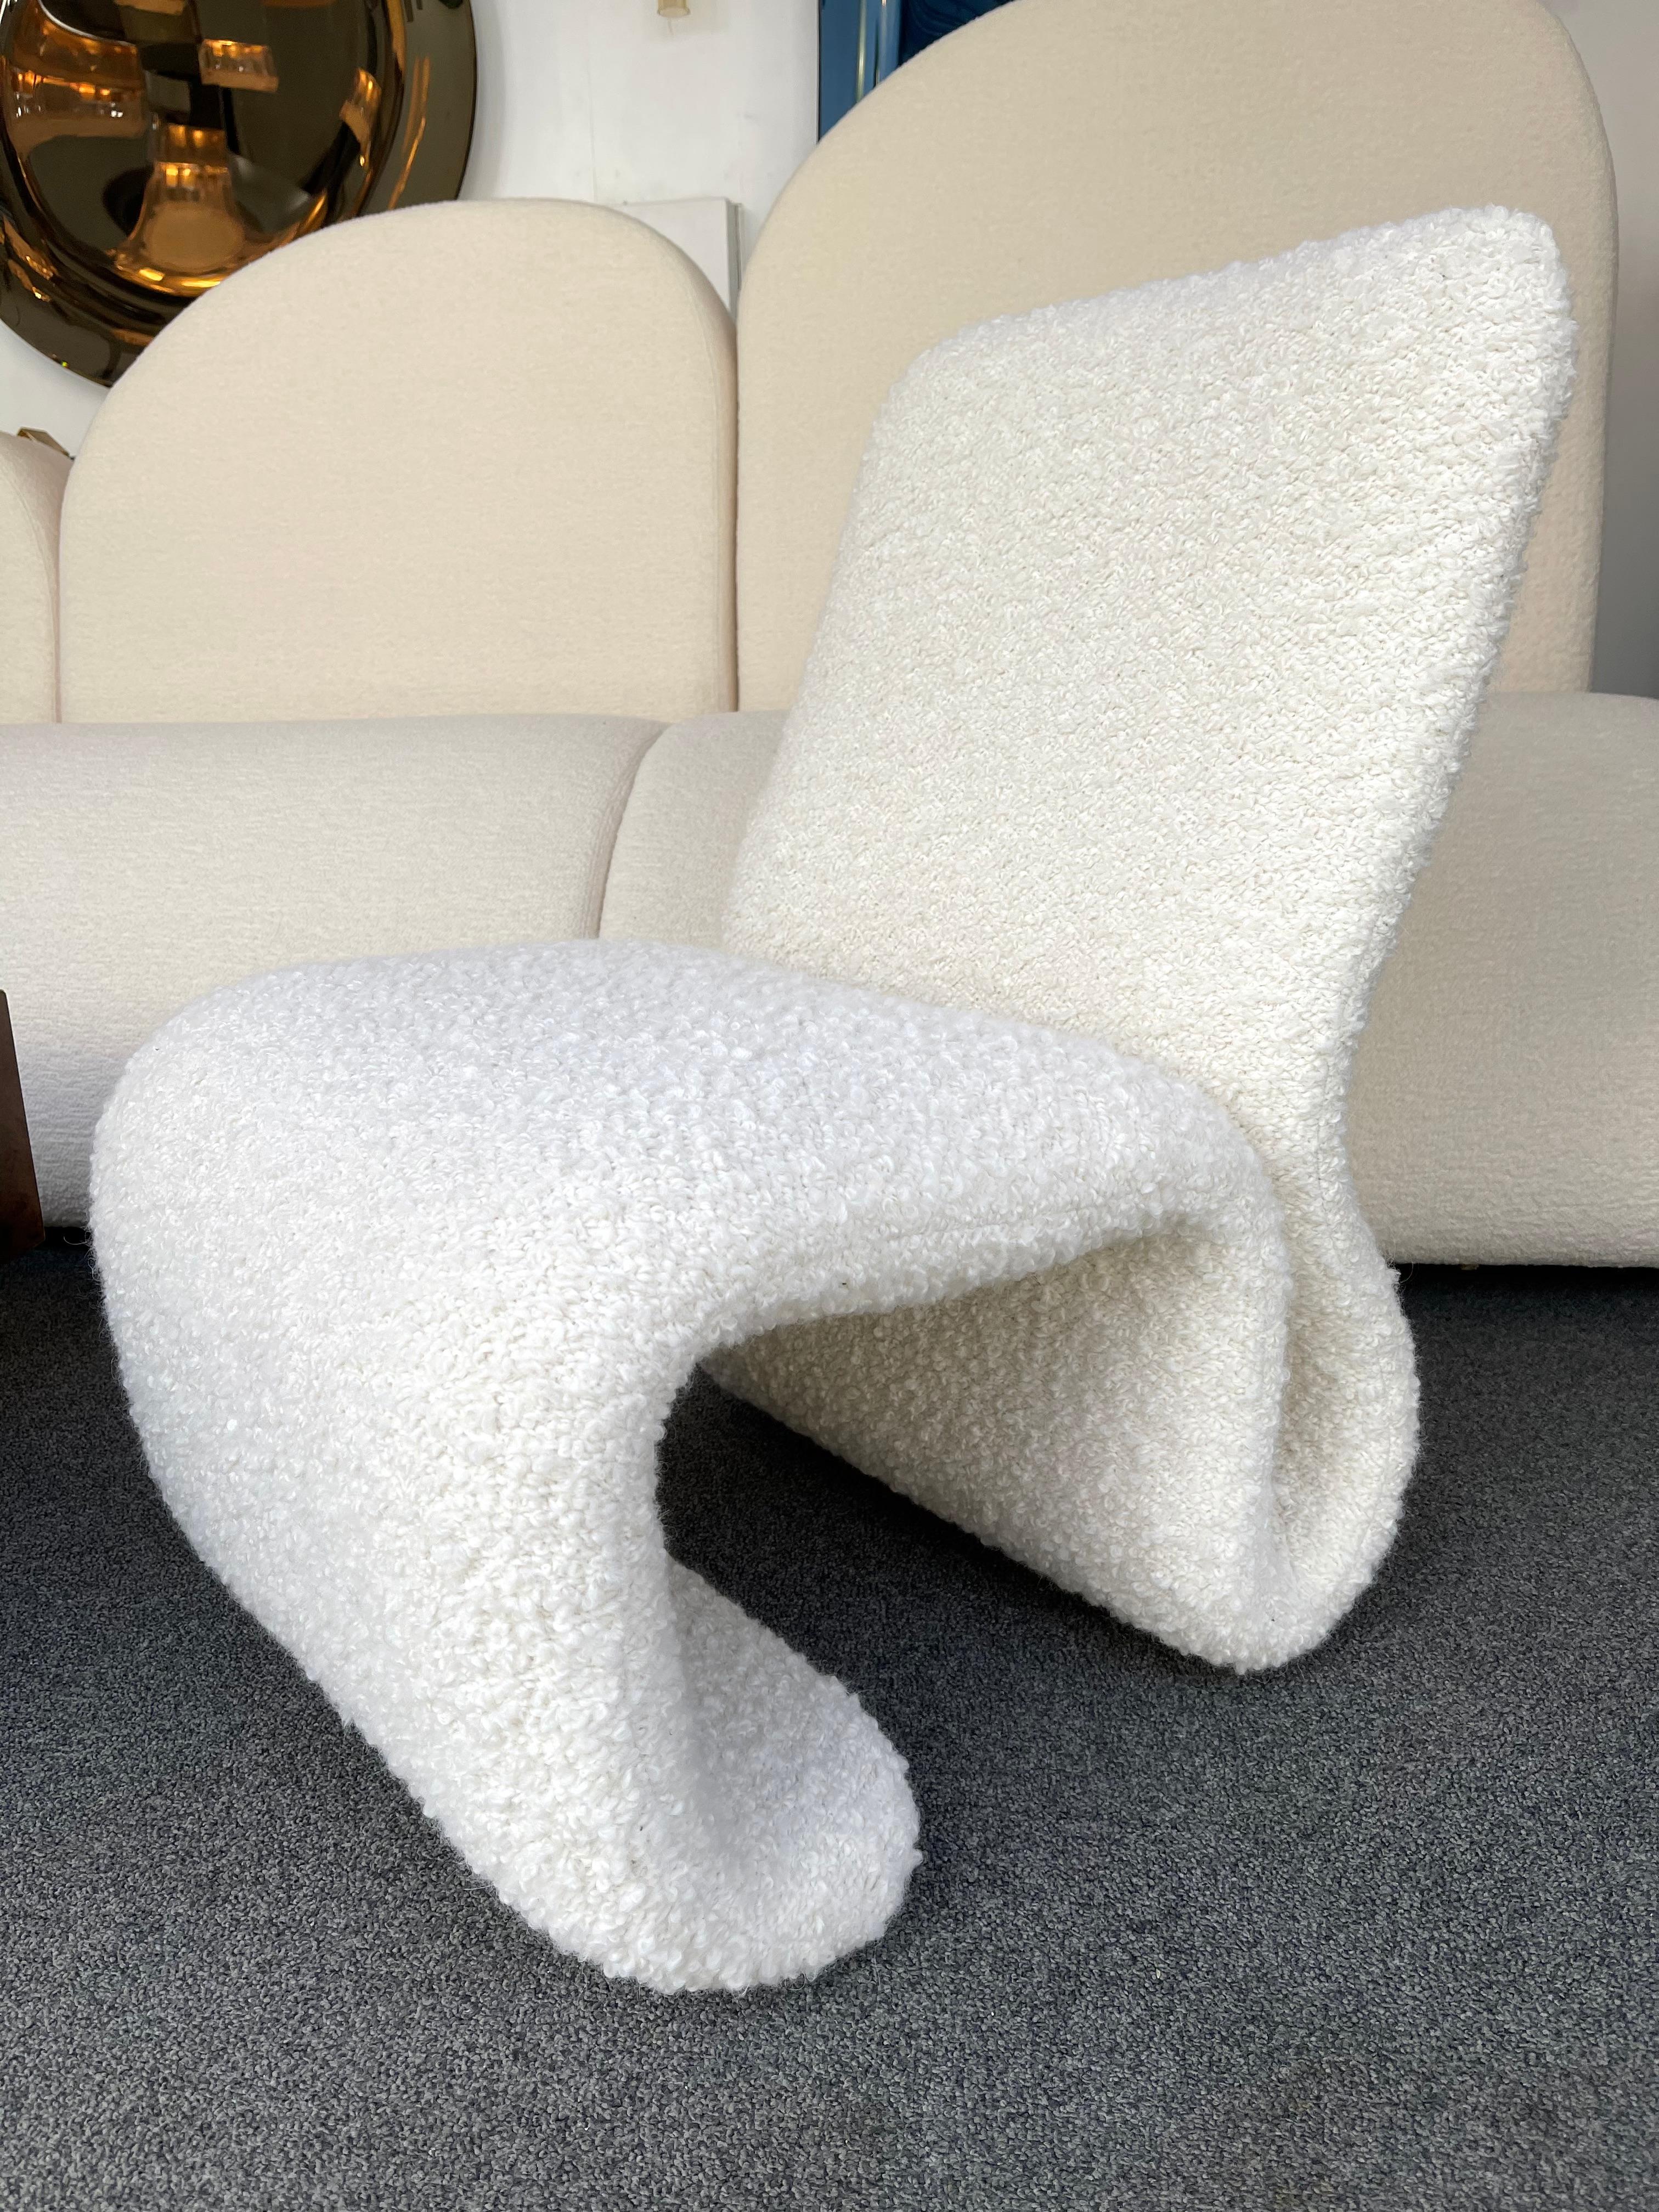 Slipper chair or armchair S design attributed to Jan Ekselius for an Italian edition. Fully new upholstery in large bouclé fabric. Famous design like Paulin, Etienne Henri Martin, Knoll, Scarpa, Cassina, Olivier Mourgue, Saarinen, Joe Colombo.